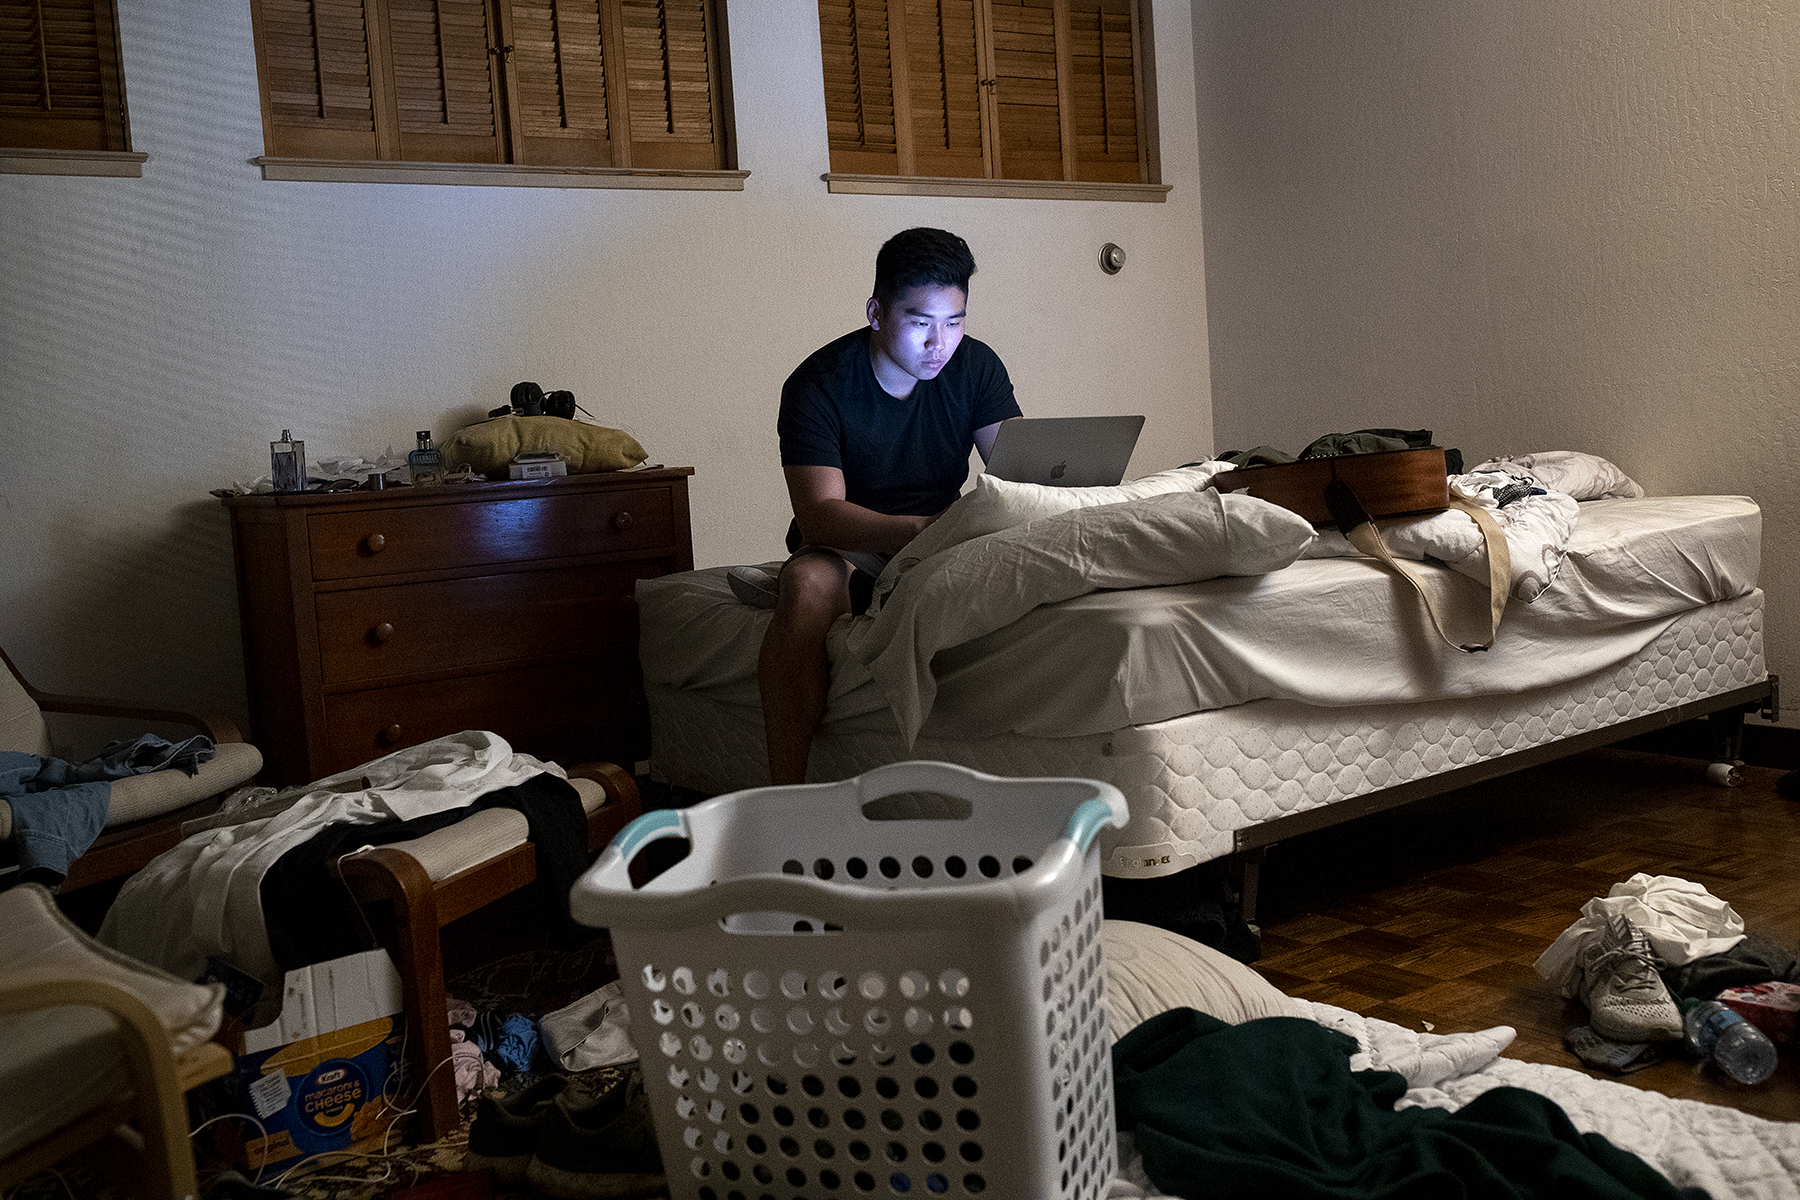 Andrew Kim works at the summer office of Do Not Pay, which is the same house that Facebook rented in the summer of 2004 in Palo Alto, Calif., on Wednesday, August 15, 2018. Do Not Pay was originally started by CEO Joshua Browder as a chatbot to help people fight parking tickets. They are currently working on an app that will automate 12 big areas of the law with the ultimate goal of making the law free. The house, located at 819 La Jennifer Way in Palo Alto, is the home Mark Zuckerberg rented in the summer of 2004 and served as Facebook's headquarters that summer. The house is typically rented to Stanford Graduate School of Business during the academic year who often sublet it to a start-up for the summer. CONTACTS: Joshua BrowderDo Not Pay CEObrowder@standford.edu702-427-0470Andrew Kimakandrewkim@gmail.com562-665-9119Harshita Aroraharshita@harshitaapps.com201-895-876516 years old, but she lives alone in US and parents are in India. Dad’s contact:Ravinder Singh Aroraravindersinghfinance@gmail.com+91 9412232320Drew Soldiniasoldini@college.harvard.edu518-275-7391Russell Pekalarussell.pekala@gmail.com612-876-2210